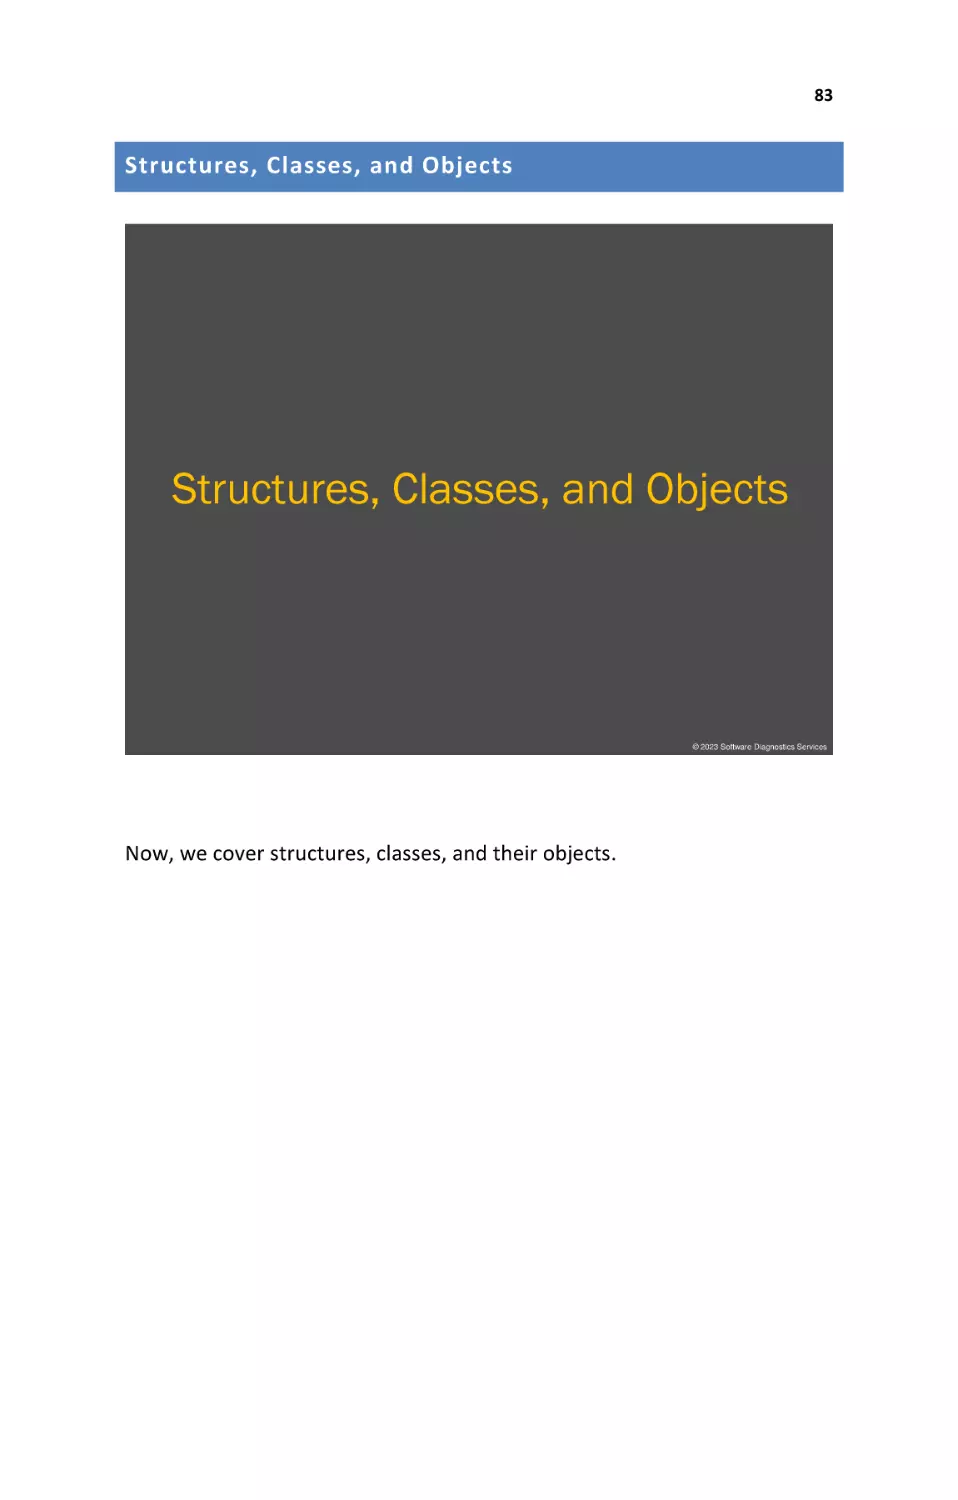 Structures, Classes, and Objects